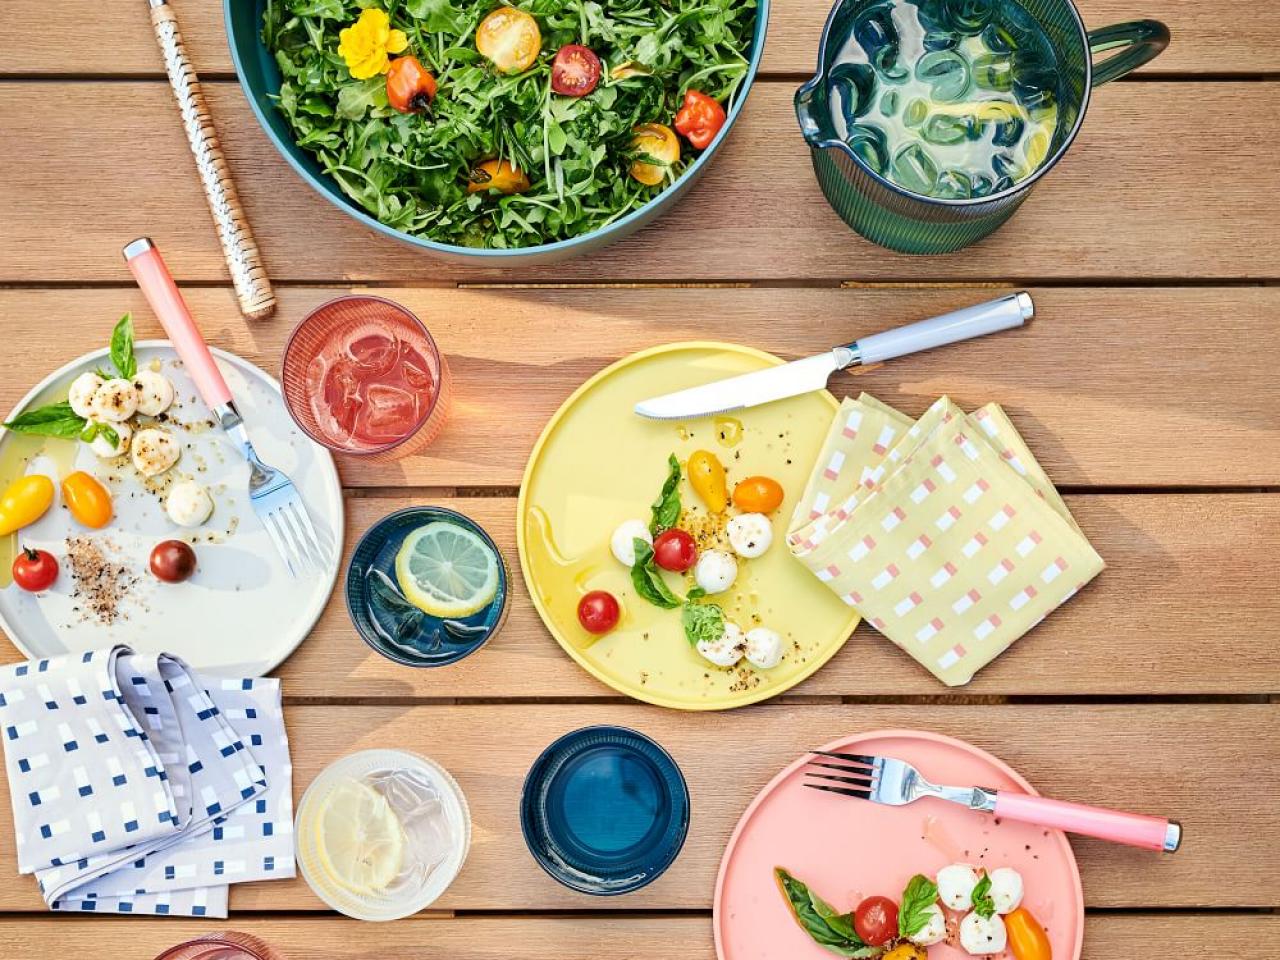 Modern Outdoor Dishes & Patio Tableware for Entertaining Outside